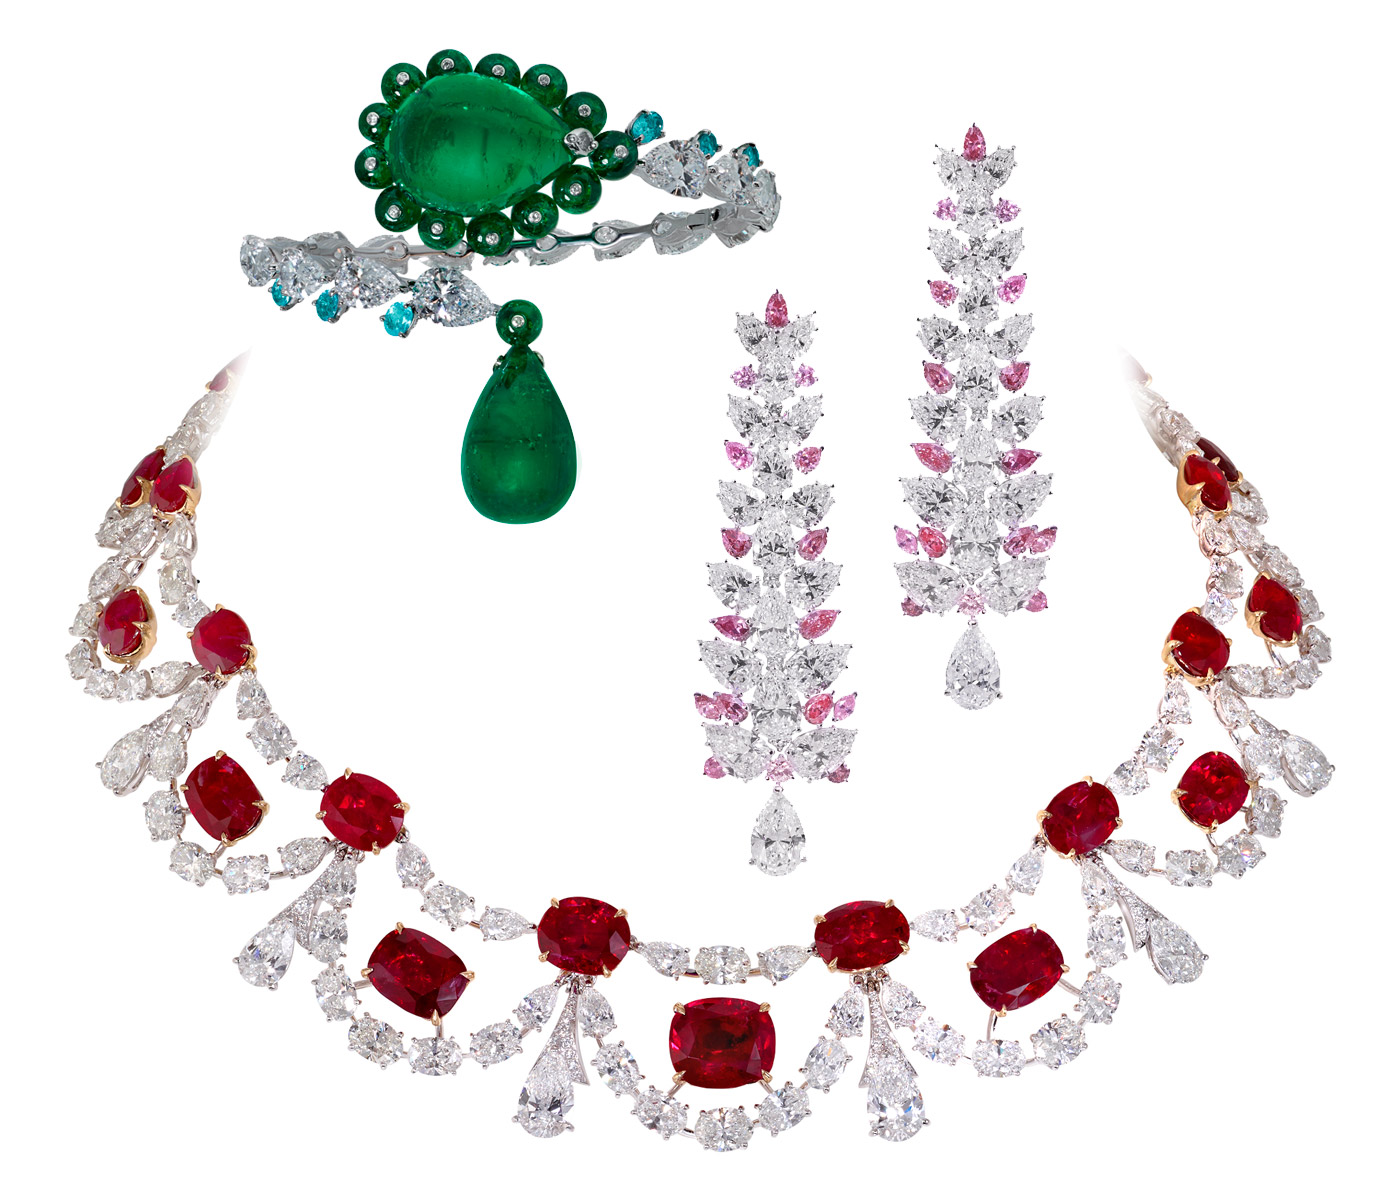 Moussaieff necklace in 77.06ct Burmese rubies and 60.77ct diamonds. Bangle in 71.34ct emeralds, diamonds and Paraiba tourmalines. Earrings in pink and colourless diamonds and platinum